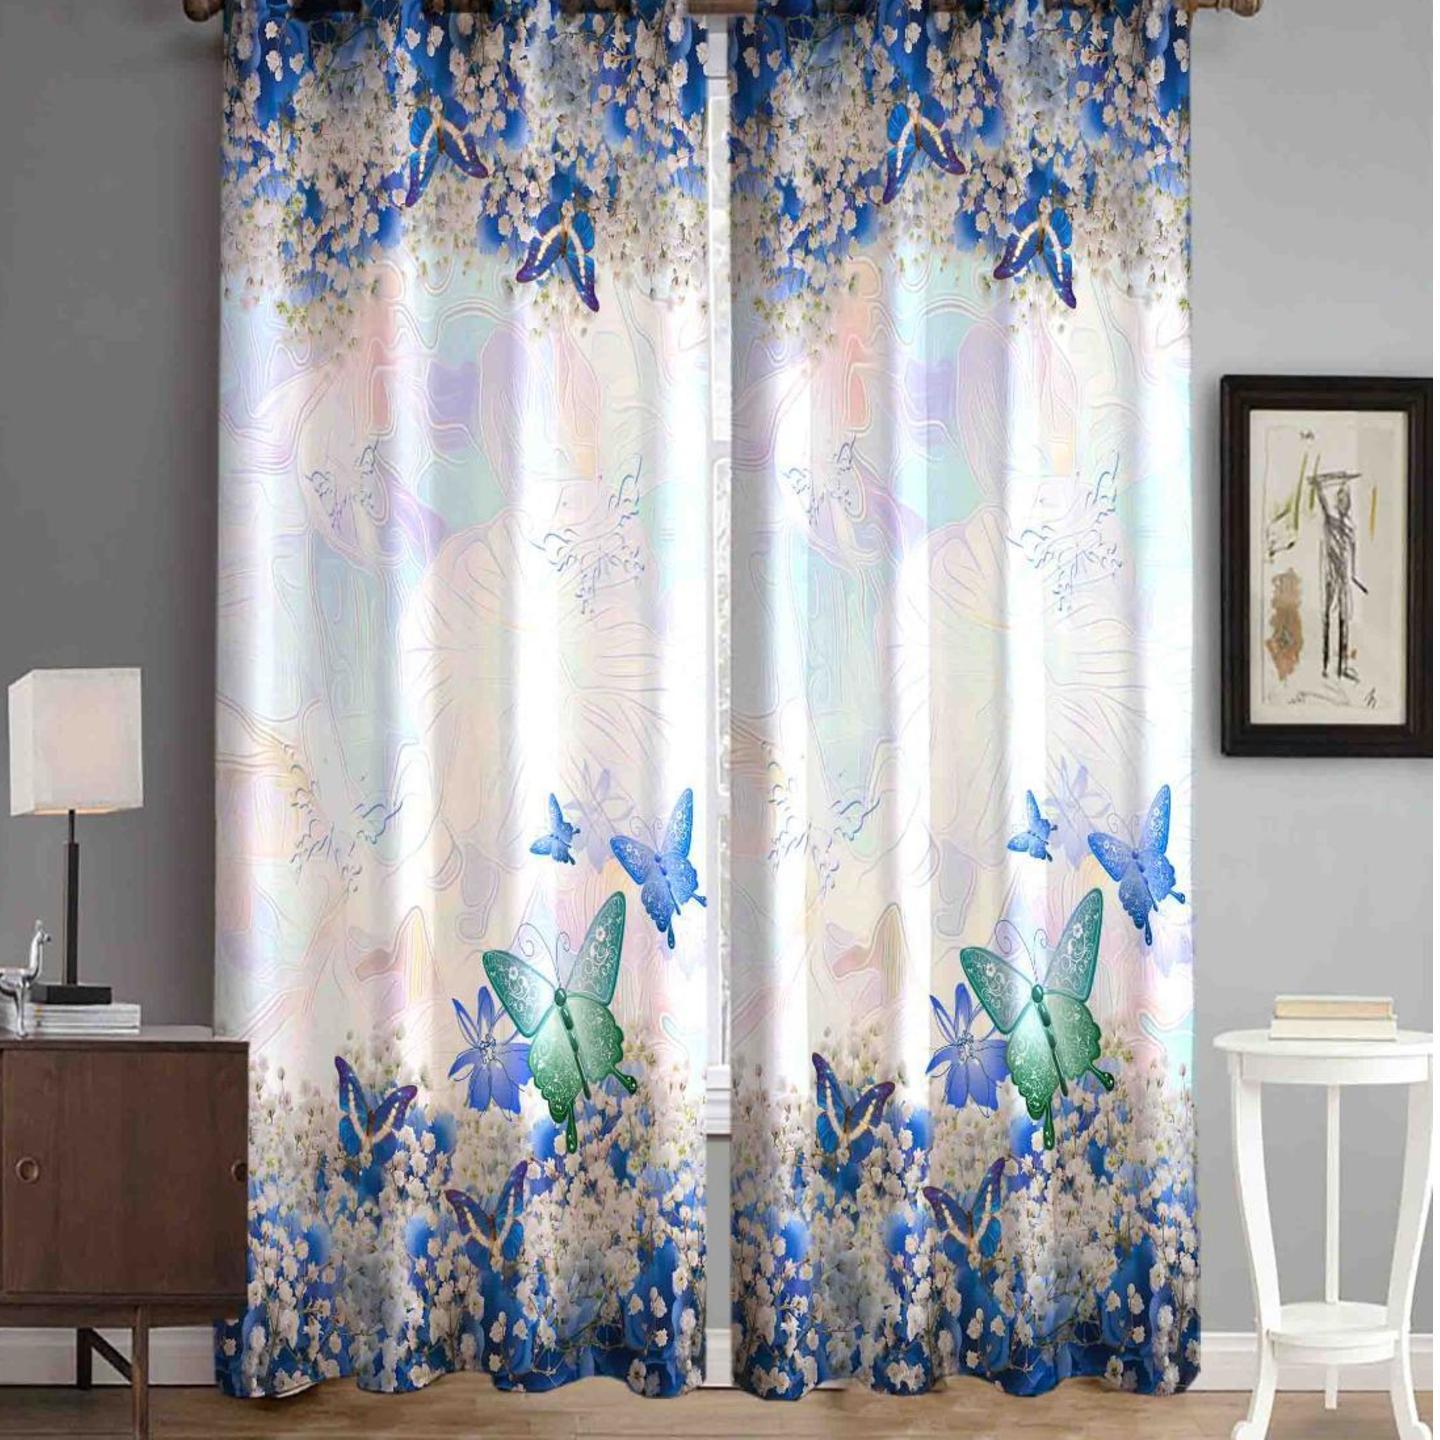 Handtex Home  Polyester Butterfly Digital Printed Curtain 4x9 Feet Multi Colour Set of 2 Pc Curtain